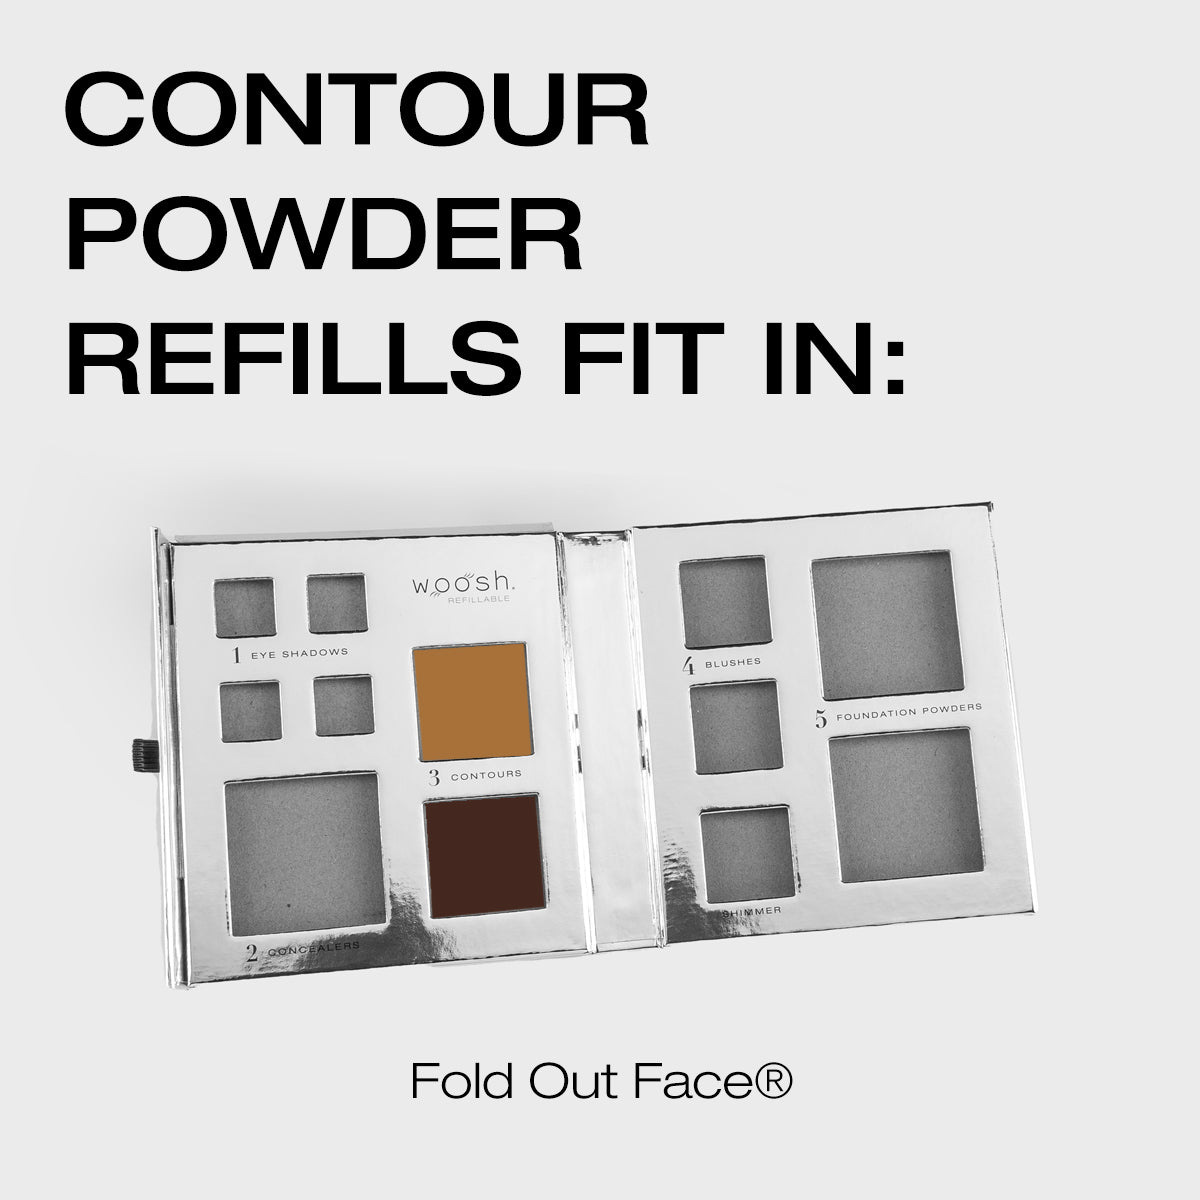 Demo of how the contour powder refills fit in the fold out face